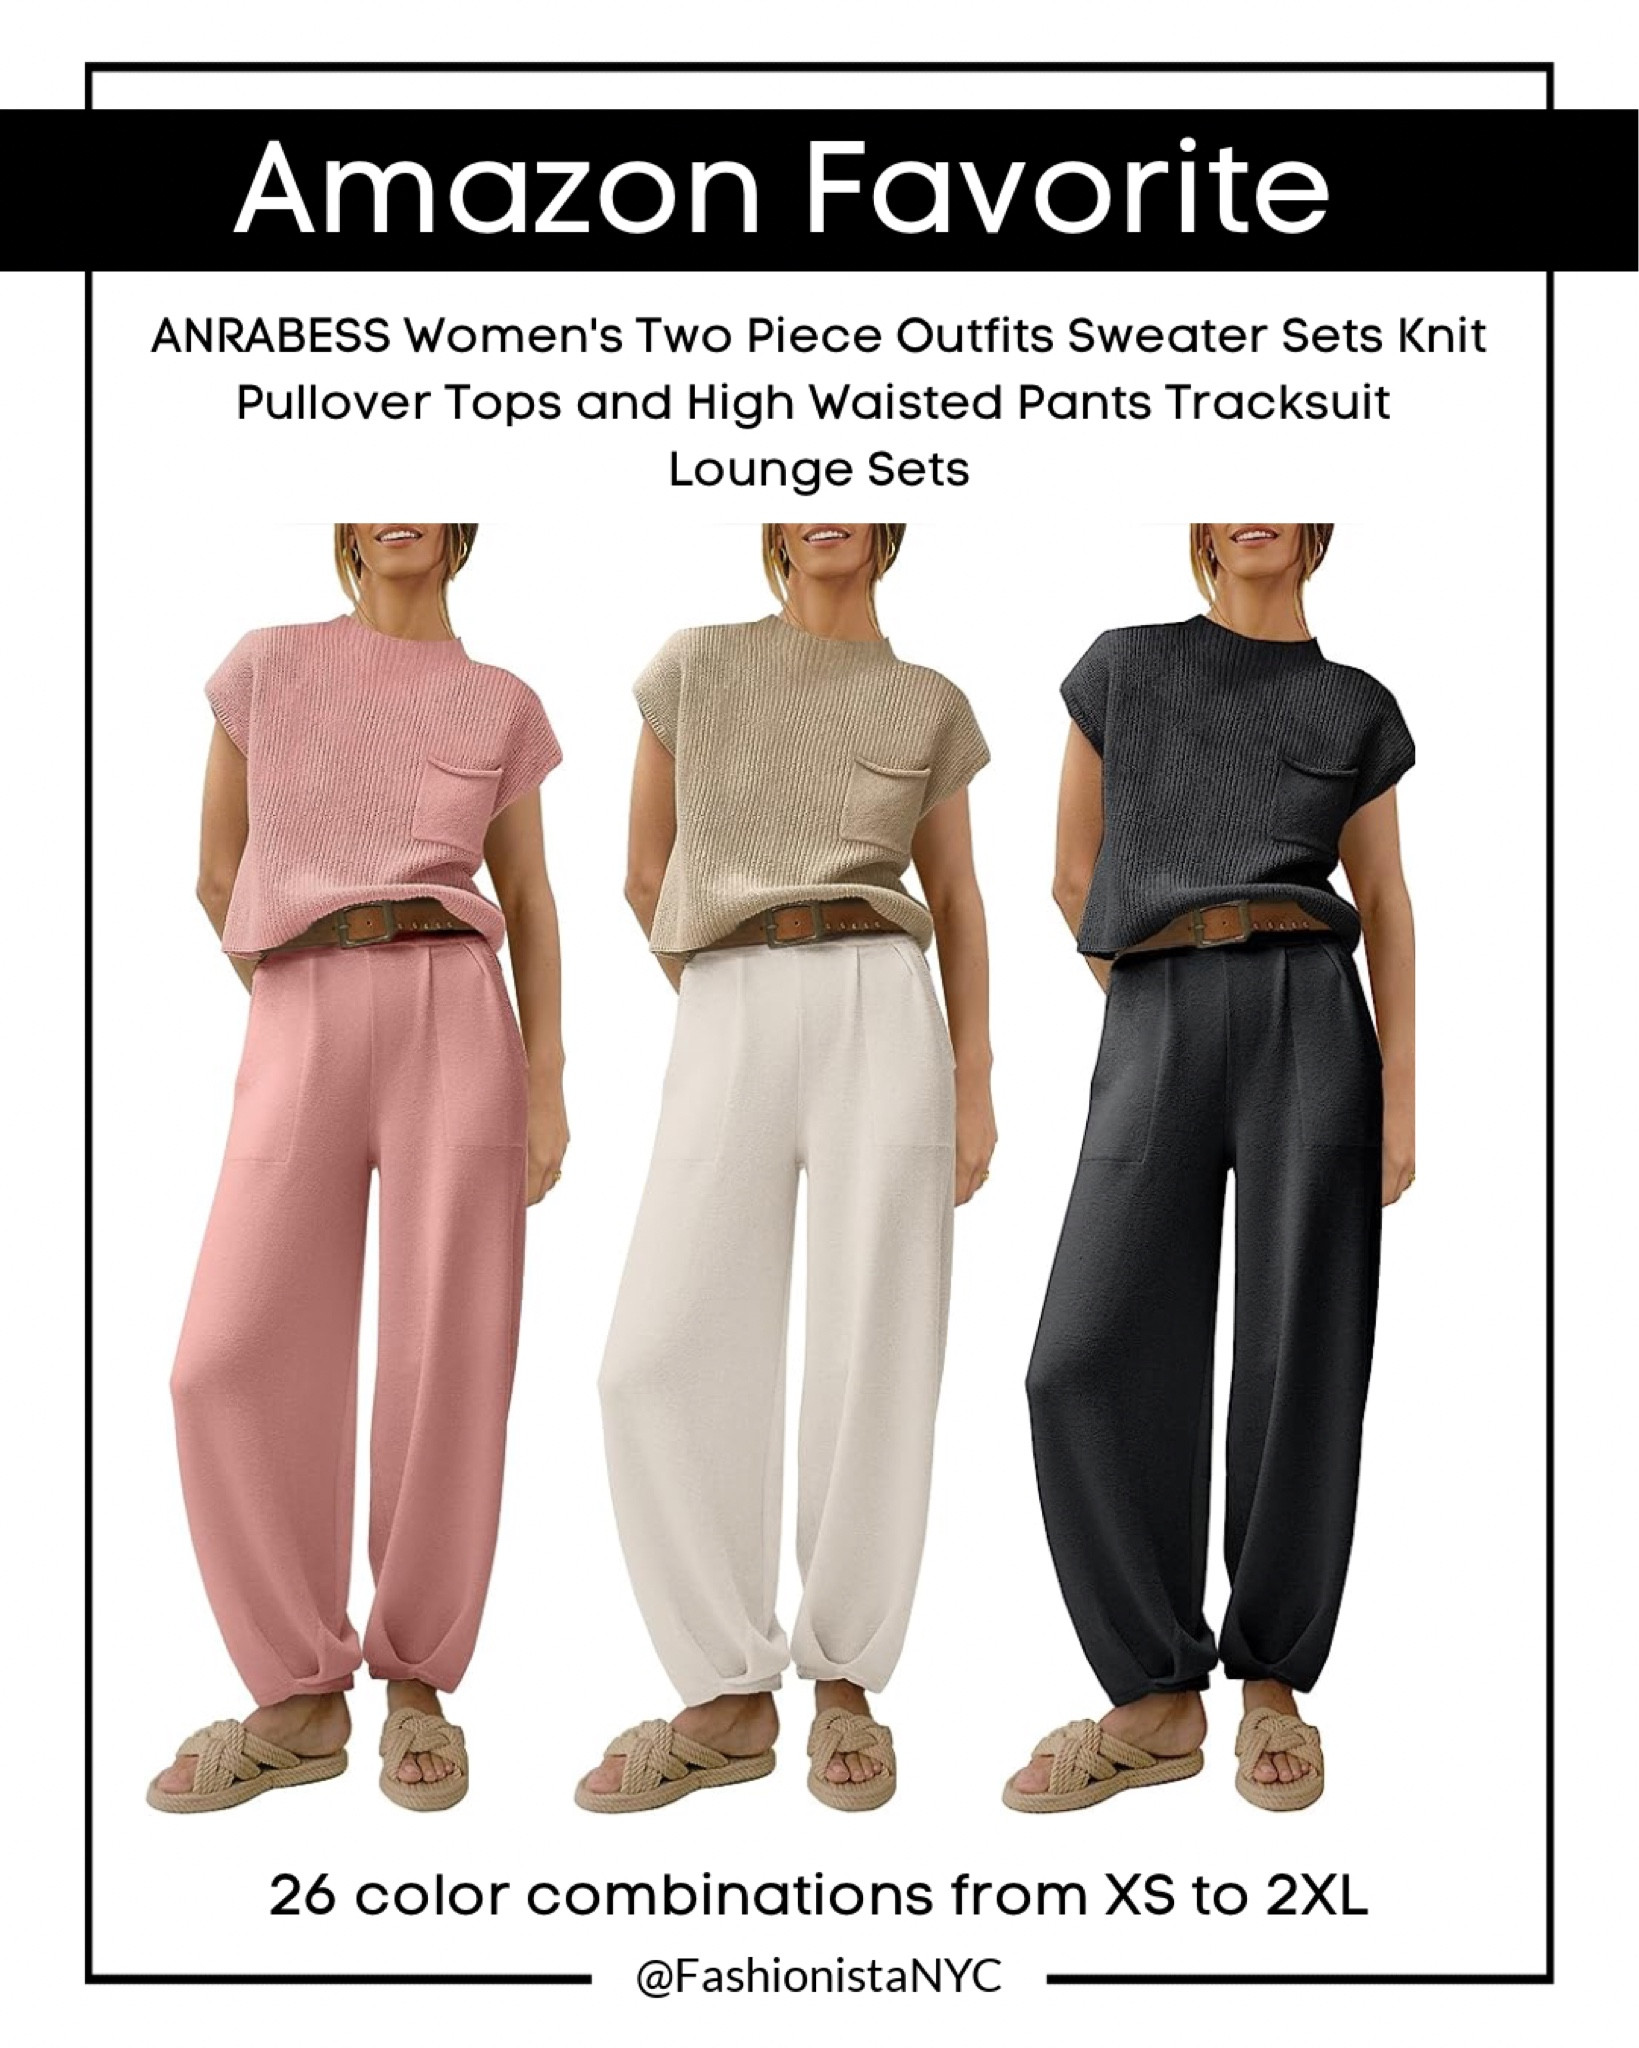 ANRABESS 2 Piece Outfits for Women Sweat Suit Knit Sweater Set